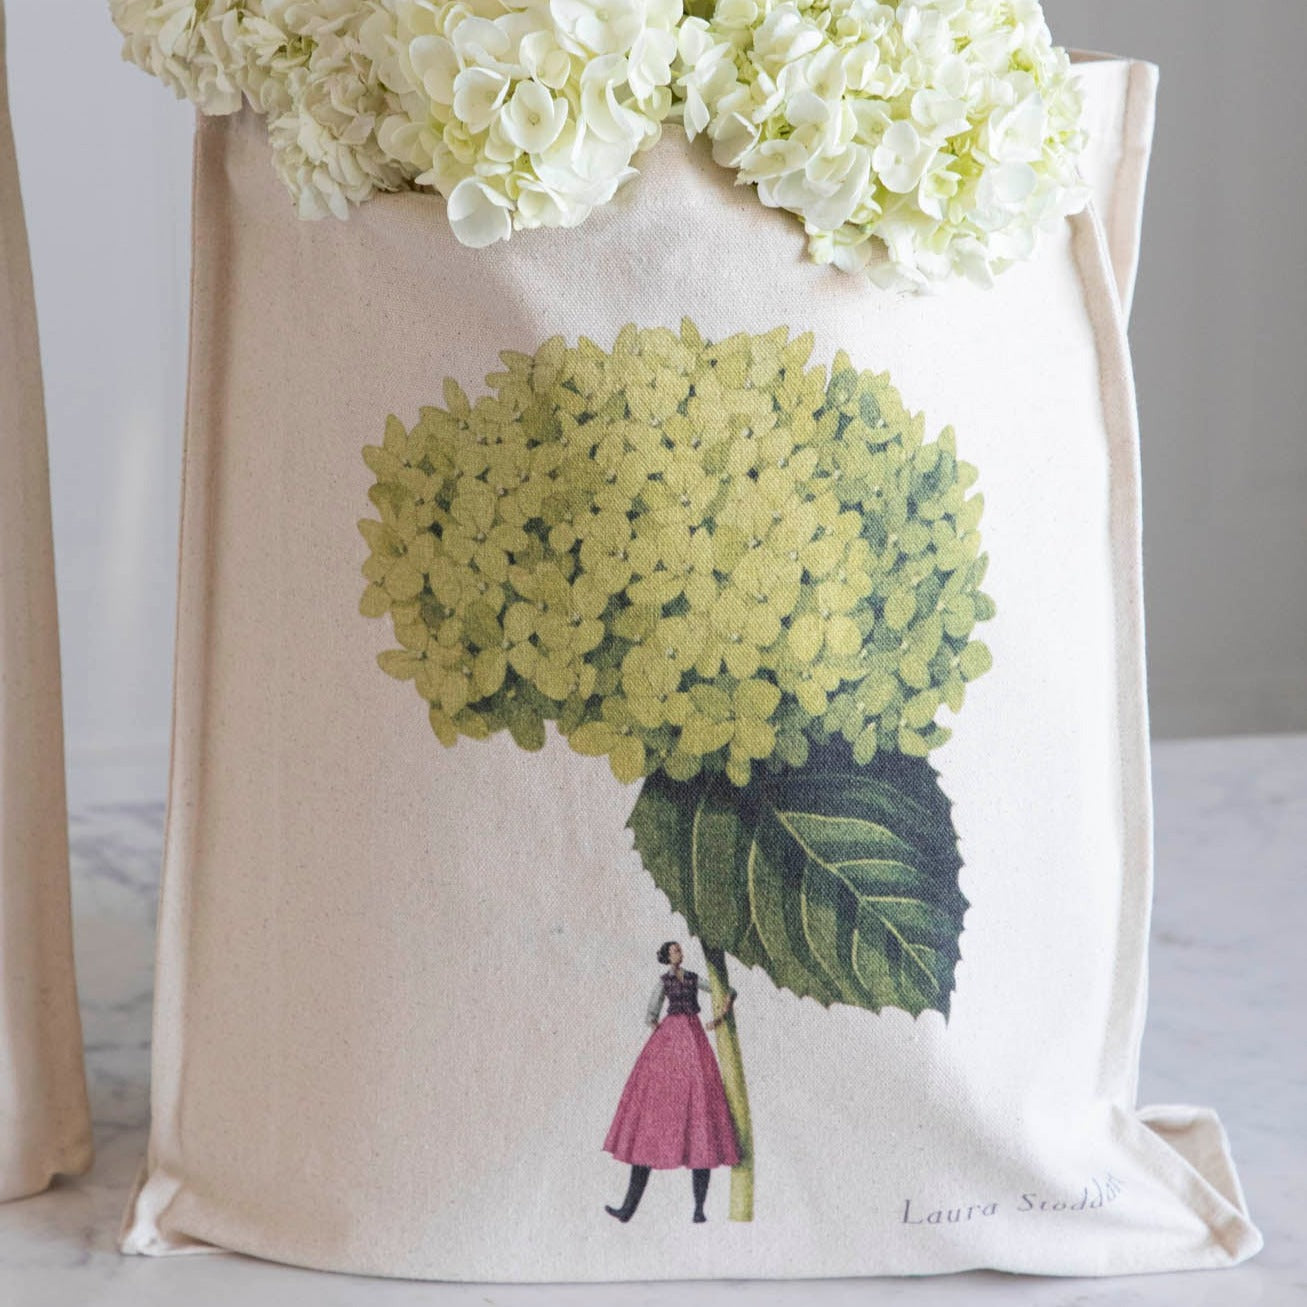 Close-up of the Annabelle Heavyweight Canvas Tote Bag standing upright in a display, showing the beautiful illustration of a woman holding a gigantic green hydrangea bloom by the stem.